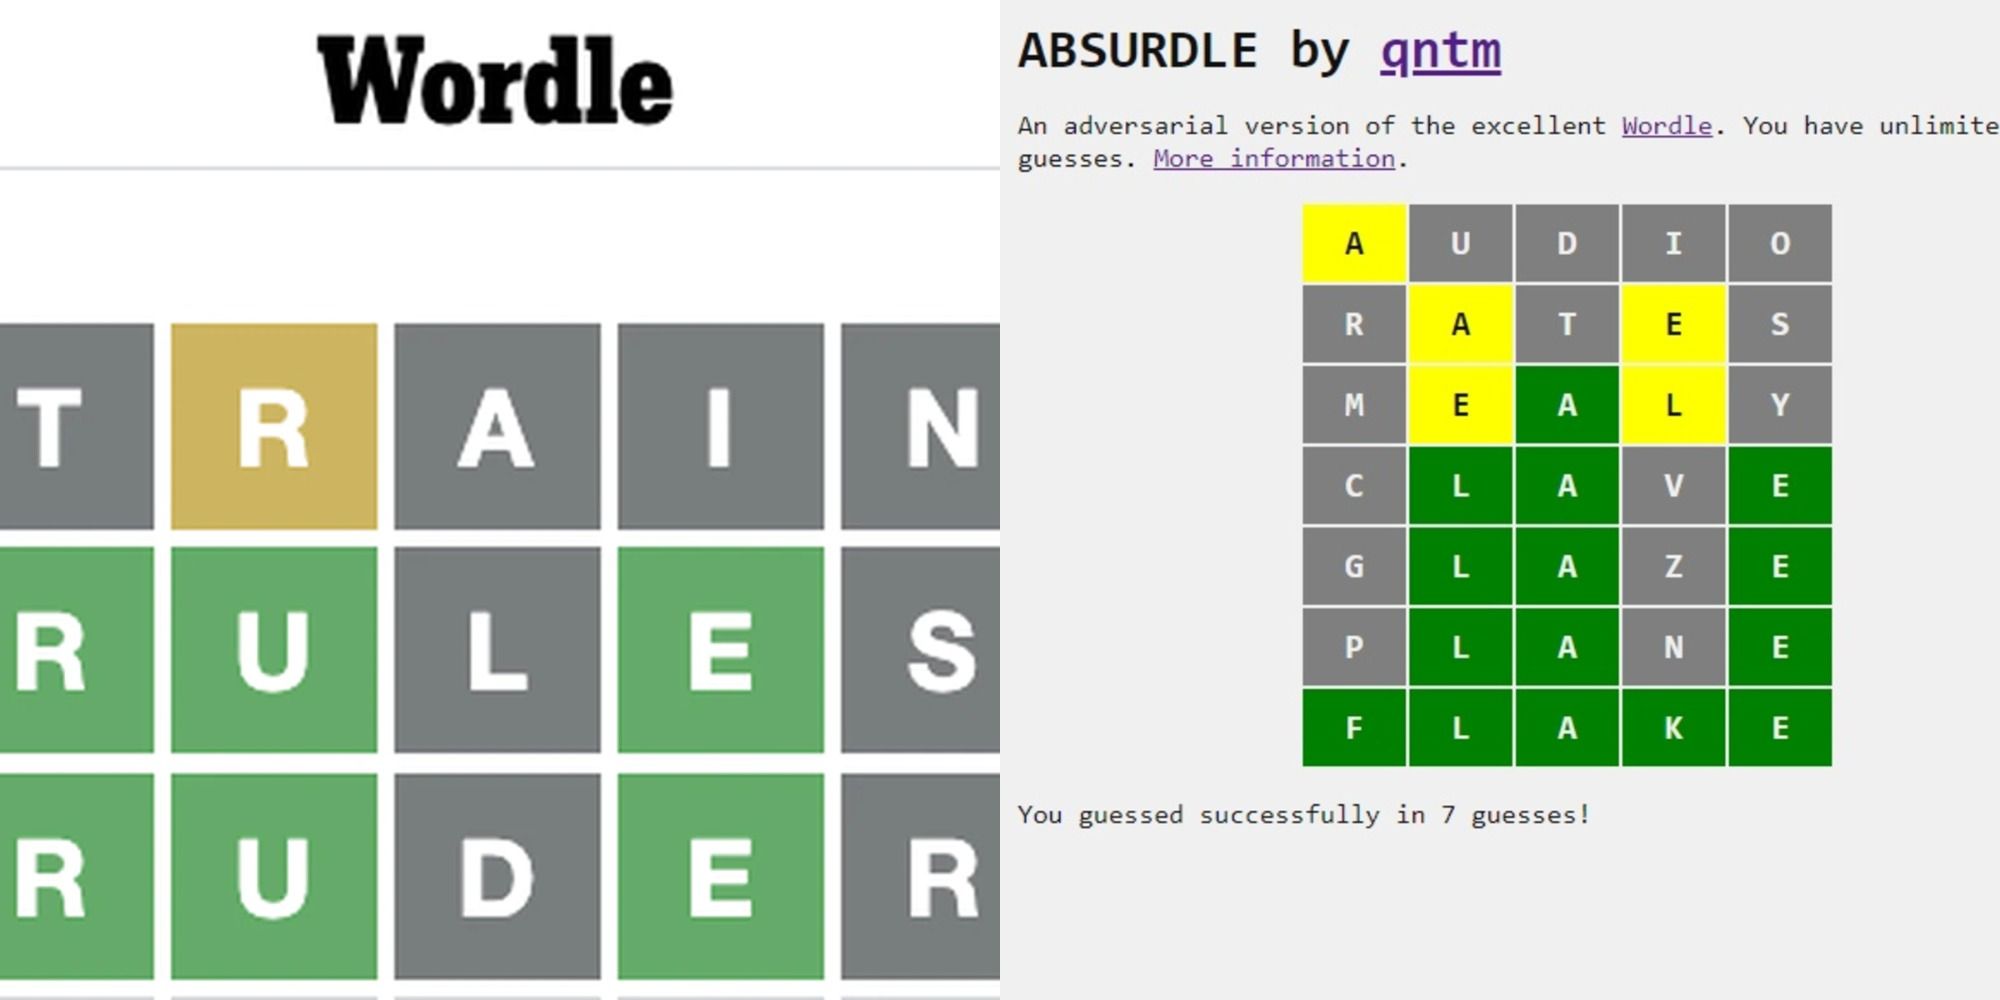 Split image showing the online games Wordle and Absurdle